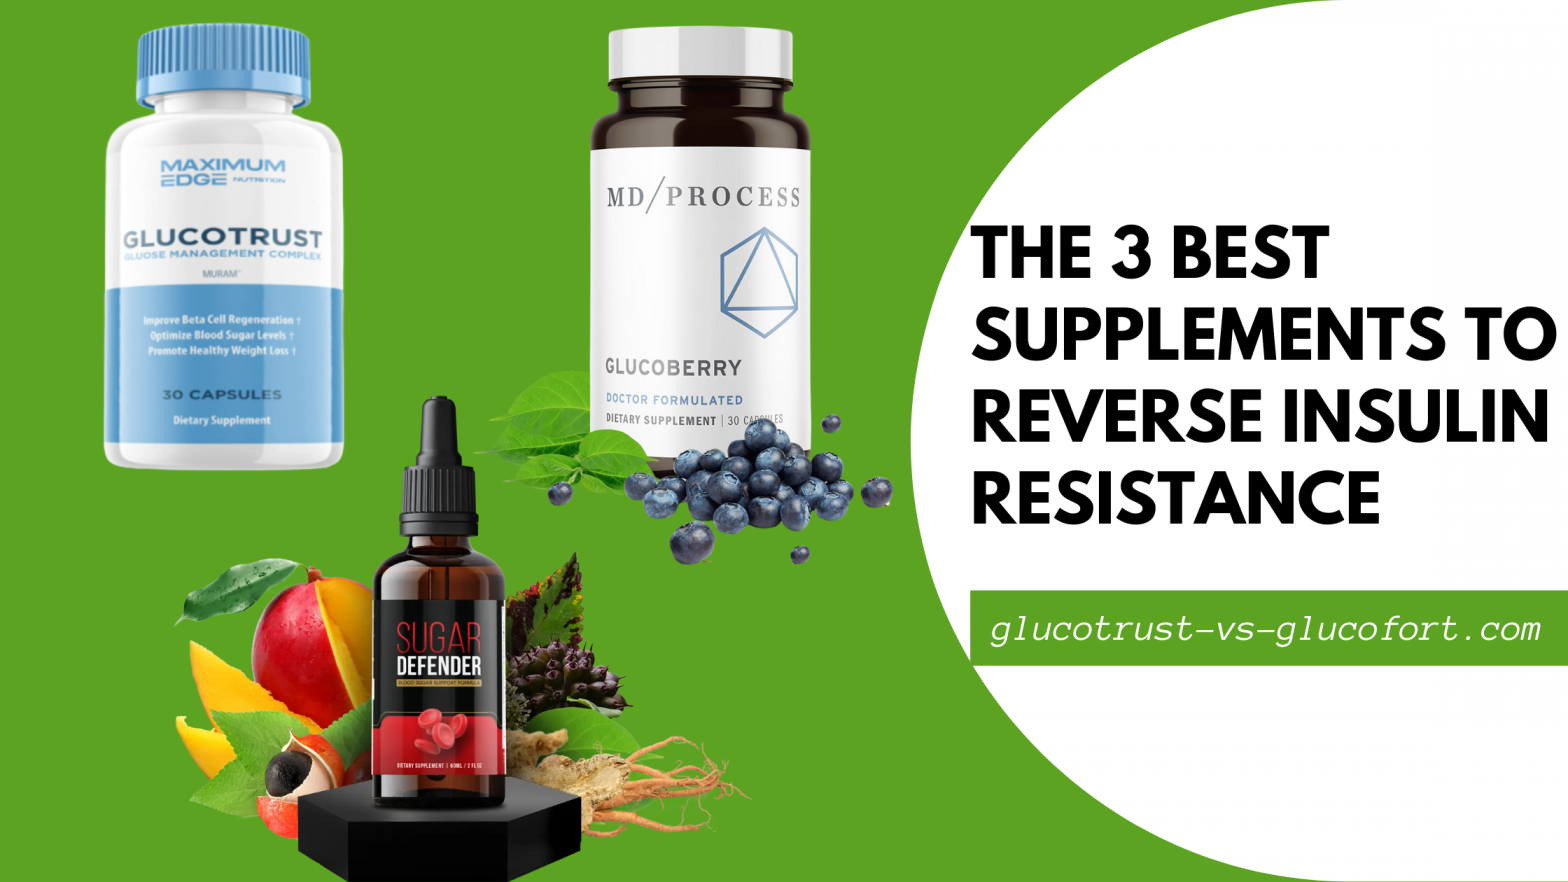 The 3 Best Supplements to Reverse Insulin Resistance